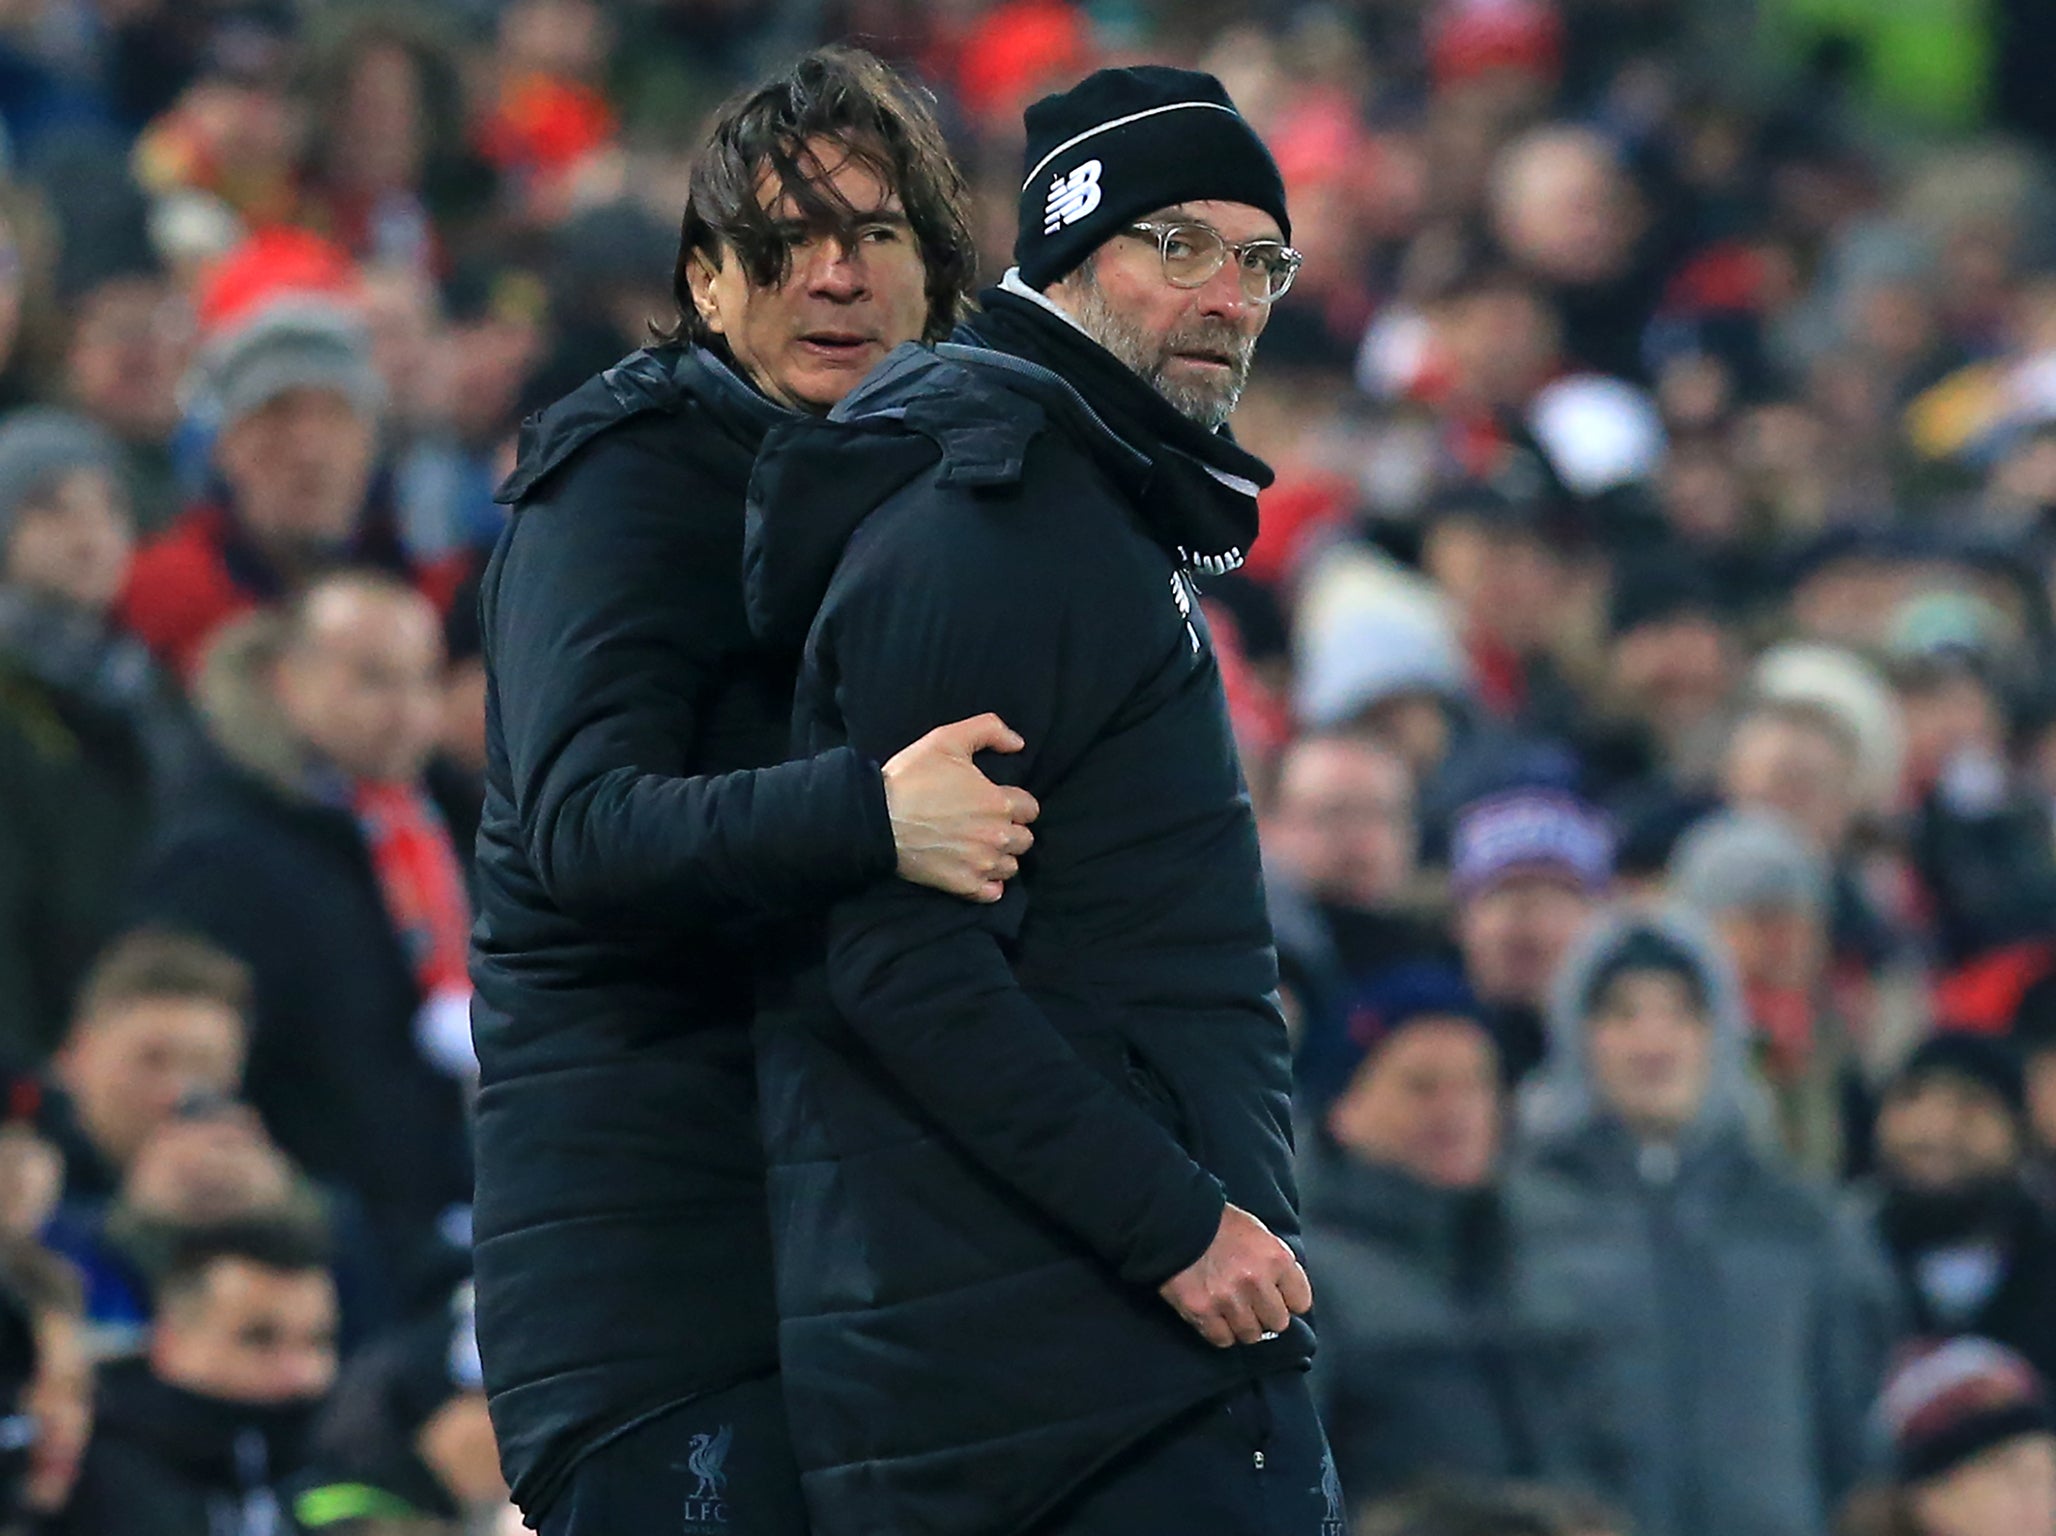 Jurgen Klopp satisfied with Liverpool&apos;s tough victory over Newcastle: &apos;We did what needed to be done&apos;